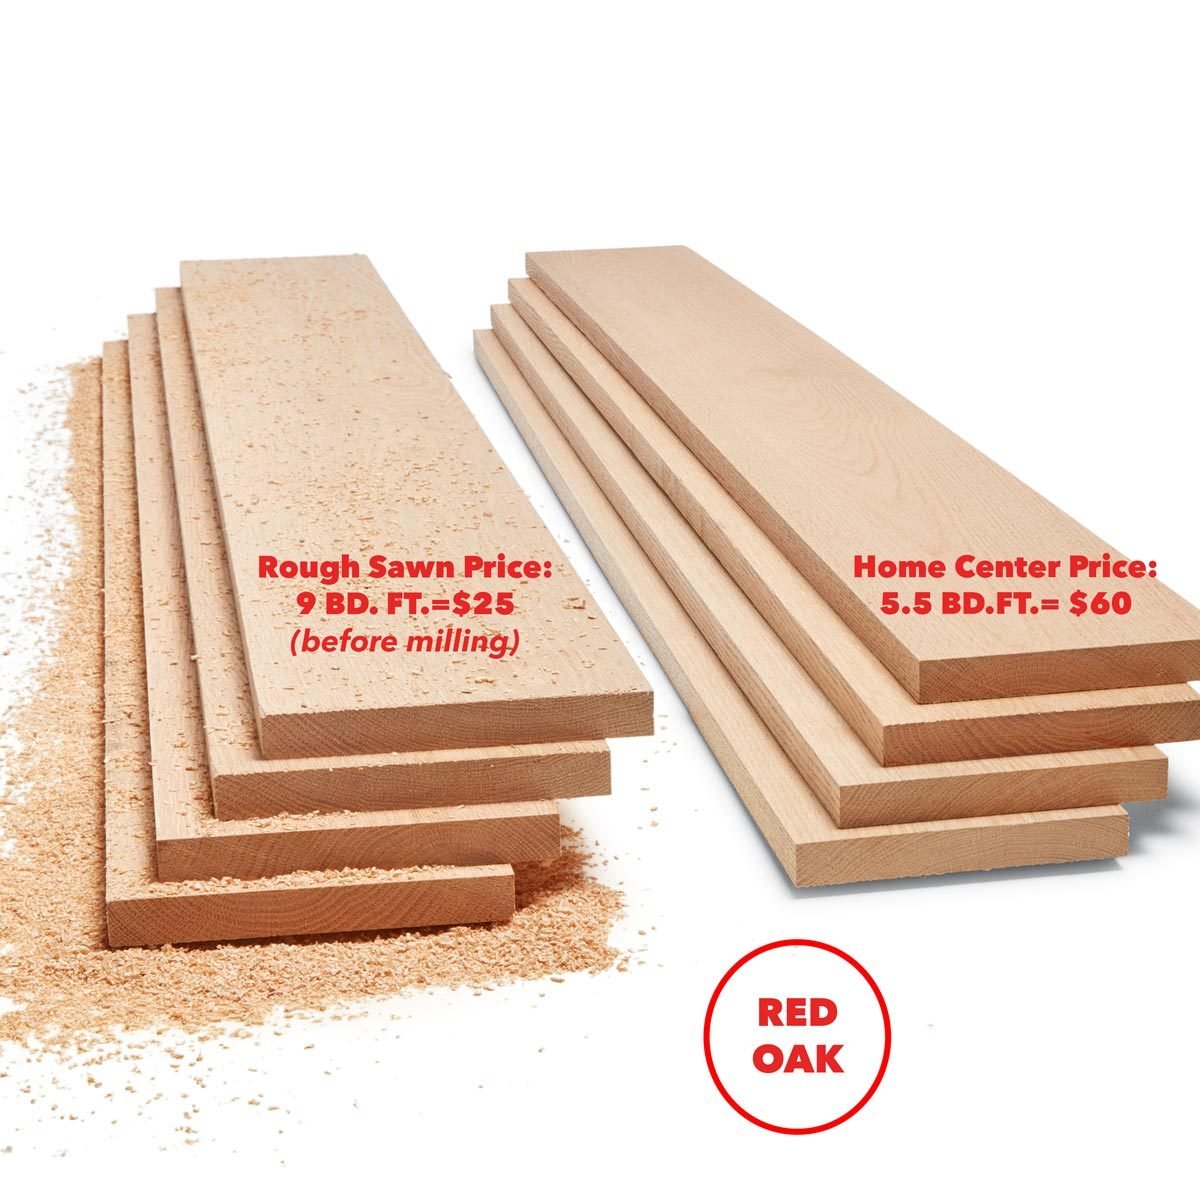 How To Buy Rough Sawn Lumber The Family Handyman